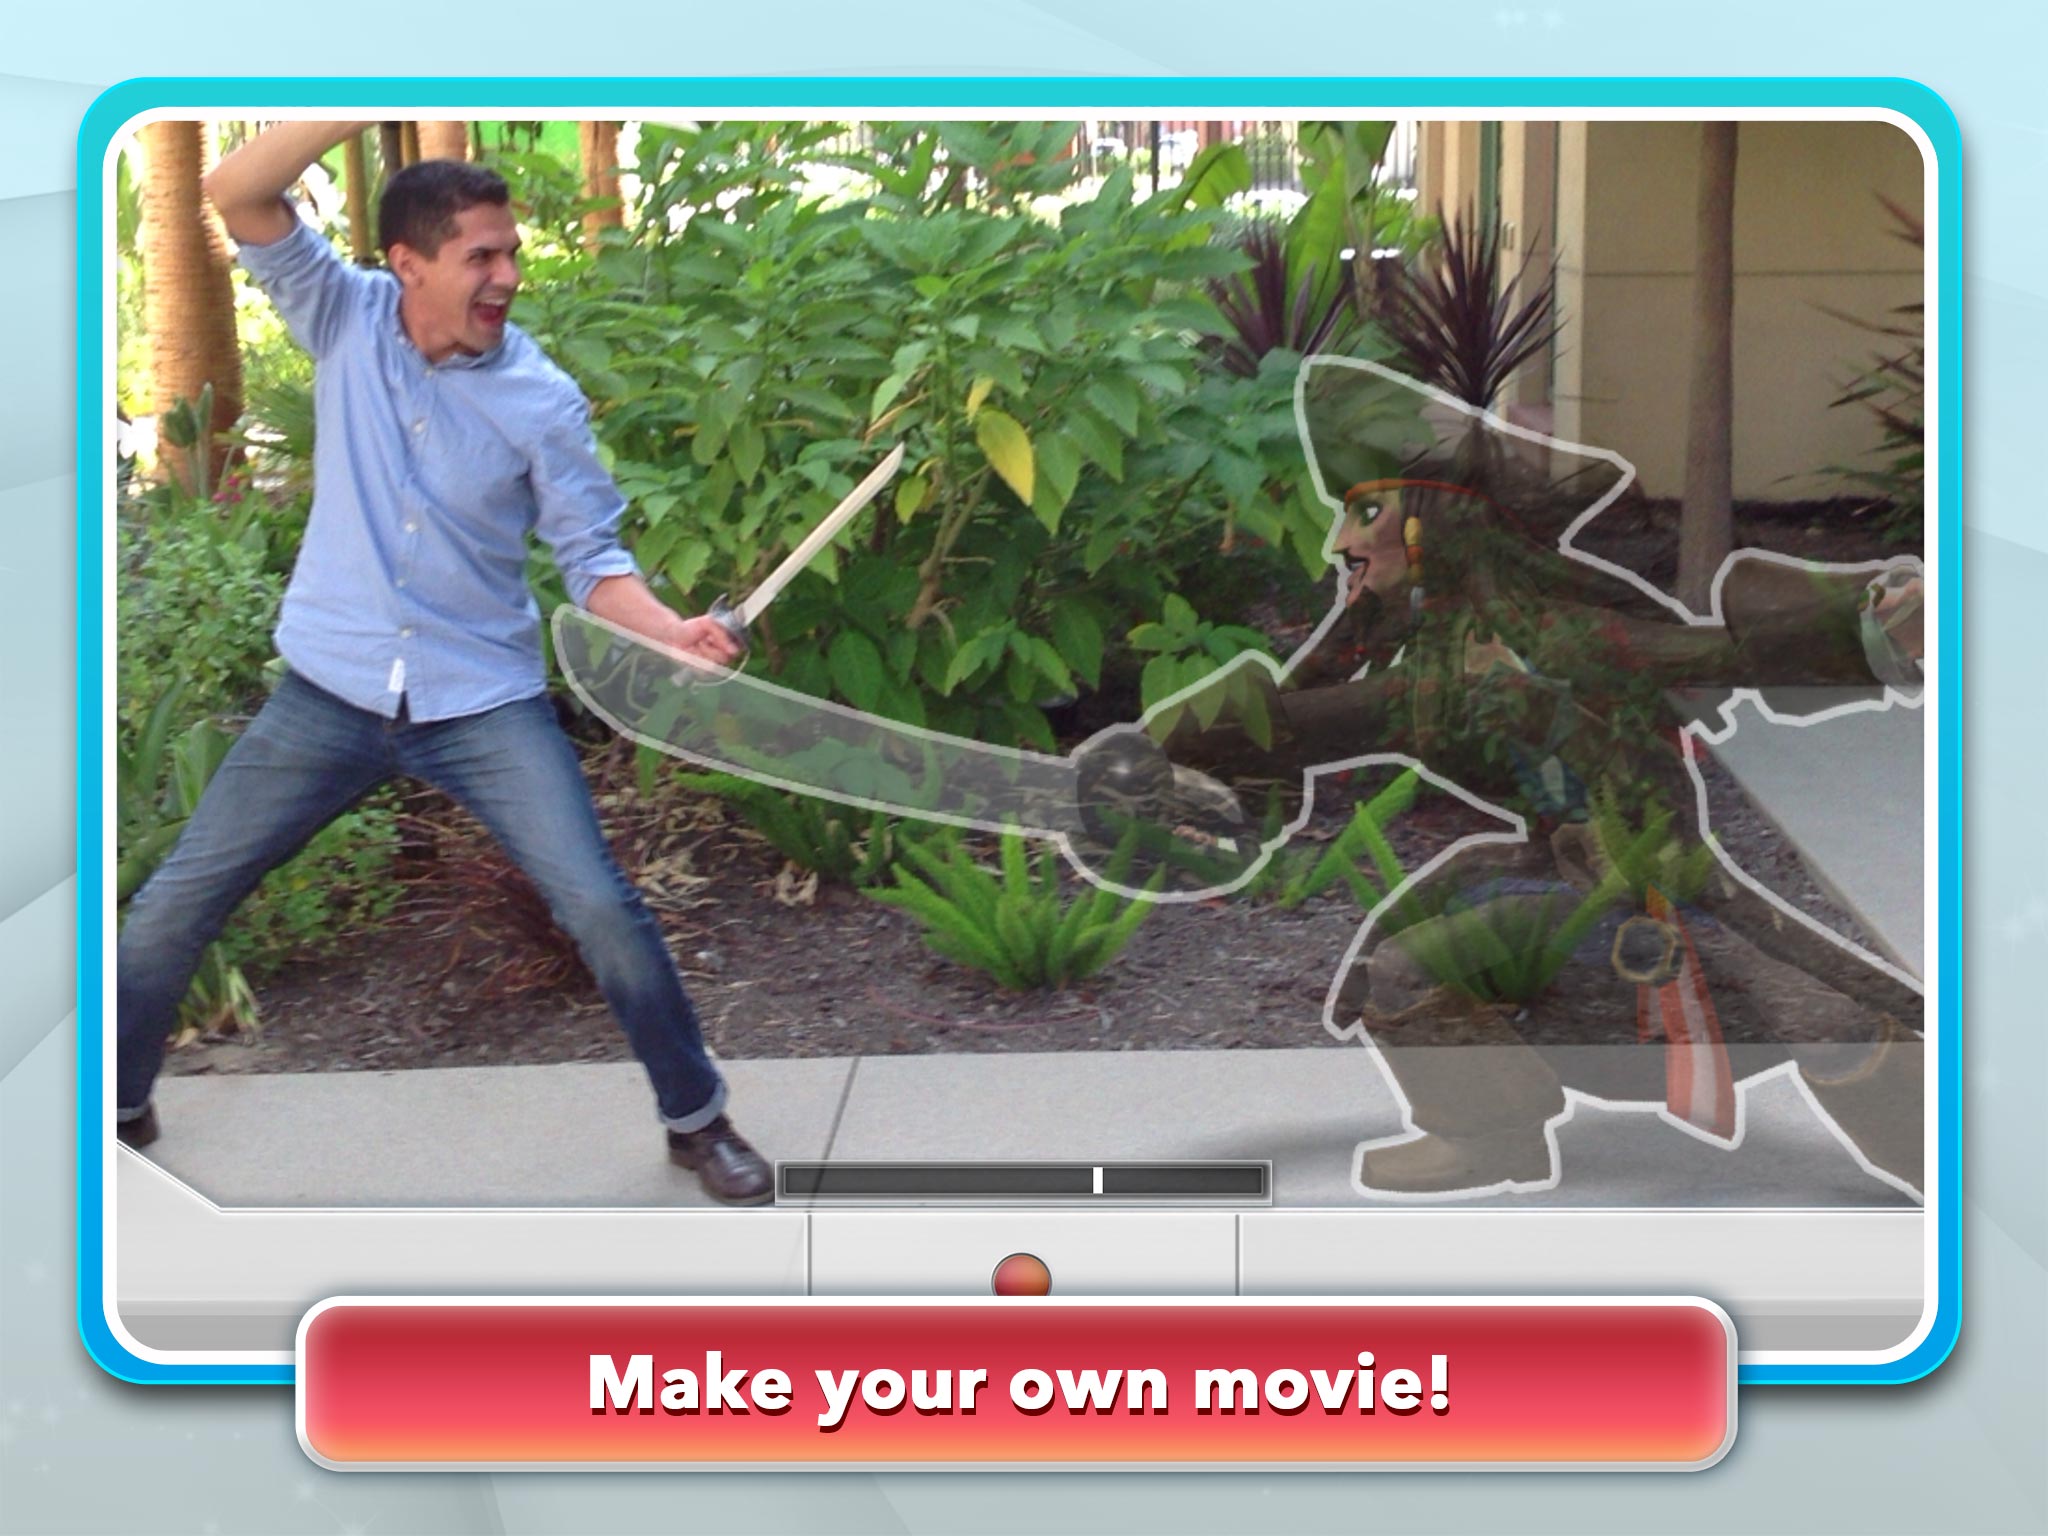 One Of Disney Infinity’s Mobile Apps Is Amazing. Not This One.